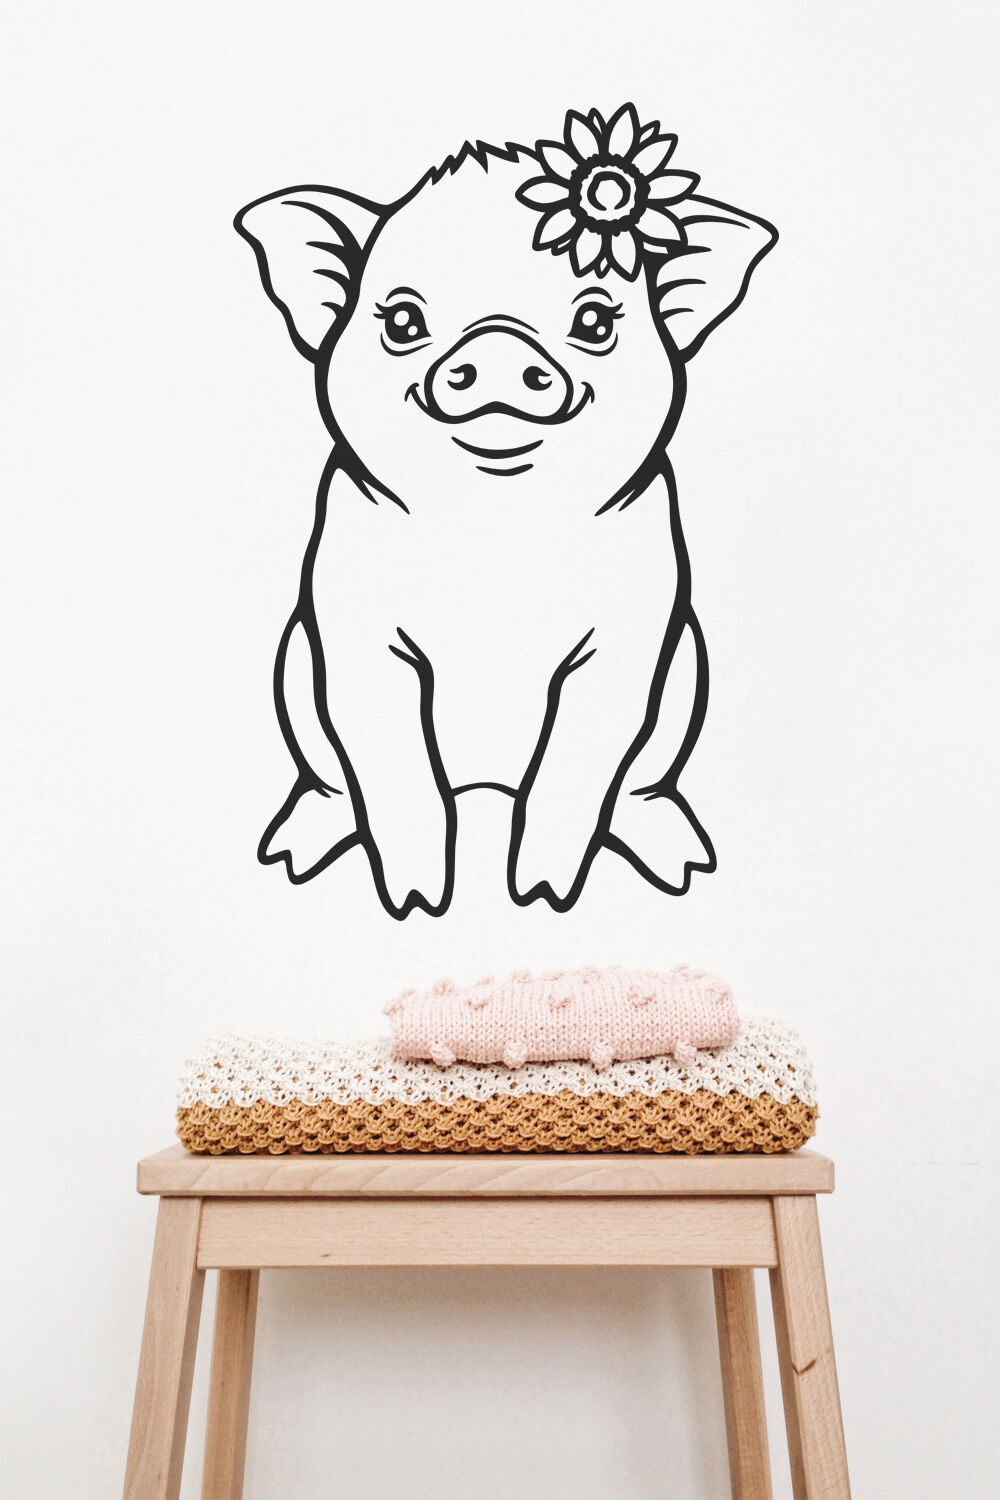 Download Pig Svg Baby Farm Animals Svg Cut Files Farmhouse Svg Files For Cricut By Green Wolf Art Thehungryjpeg Com